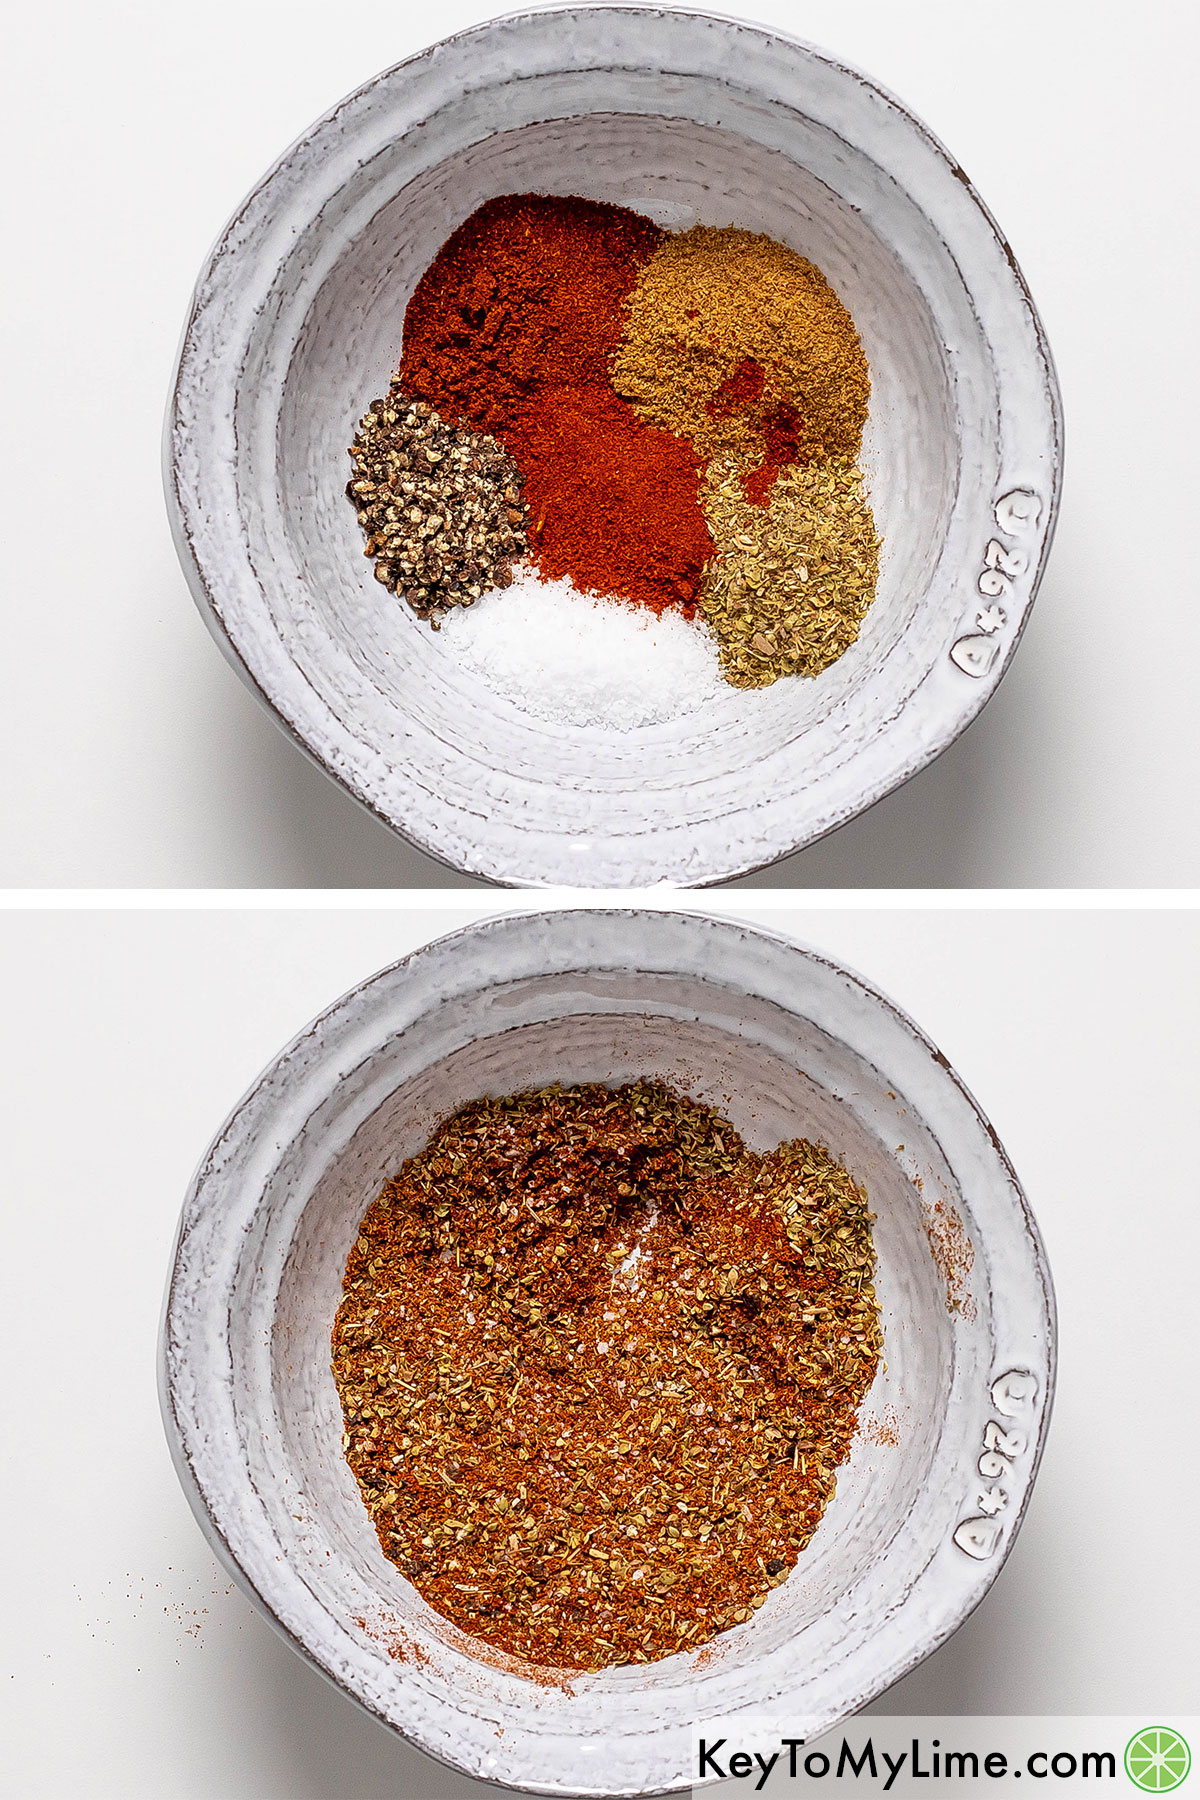 Mixing together a homemade carnitas spice blend.